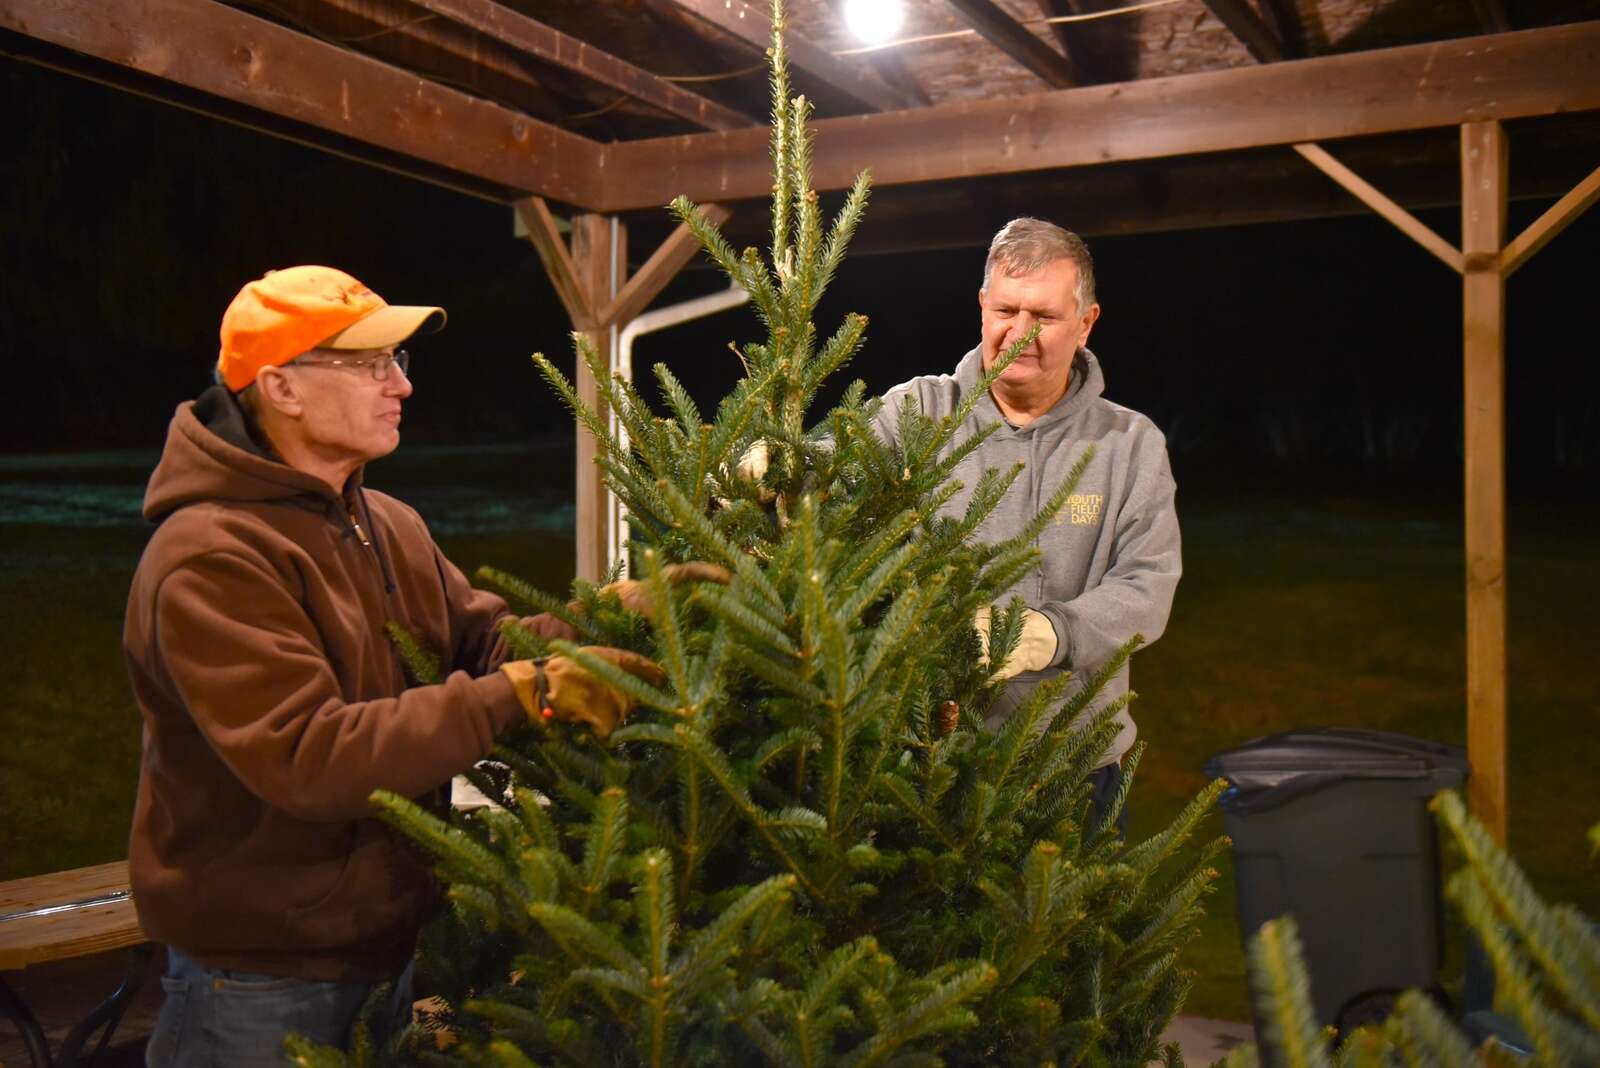 Butler Lions Club set up Christmas trees for the Butler Lions Club Christmas tree sale